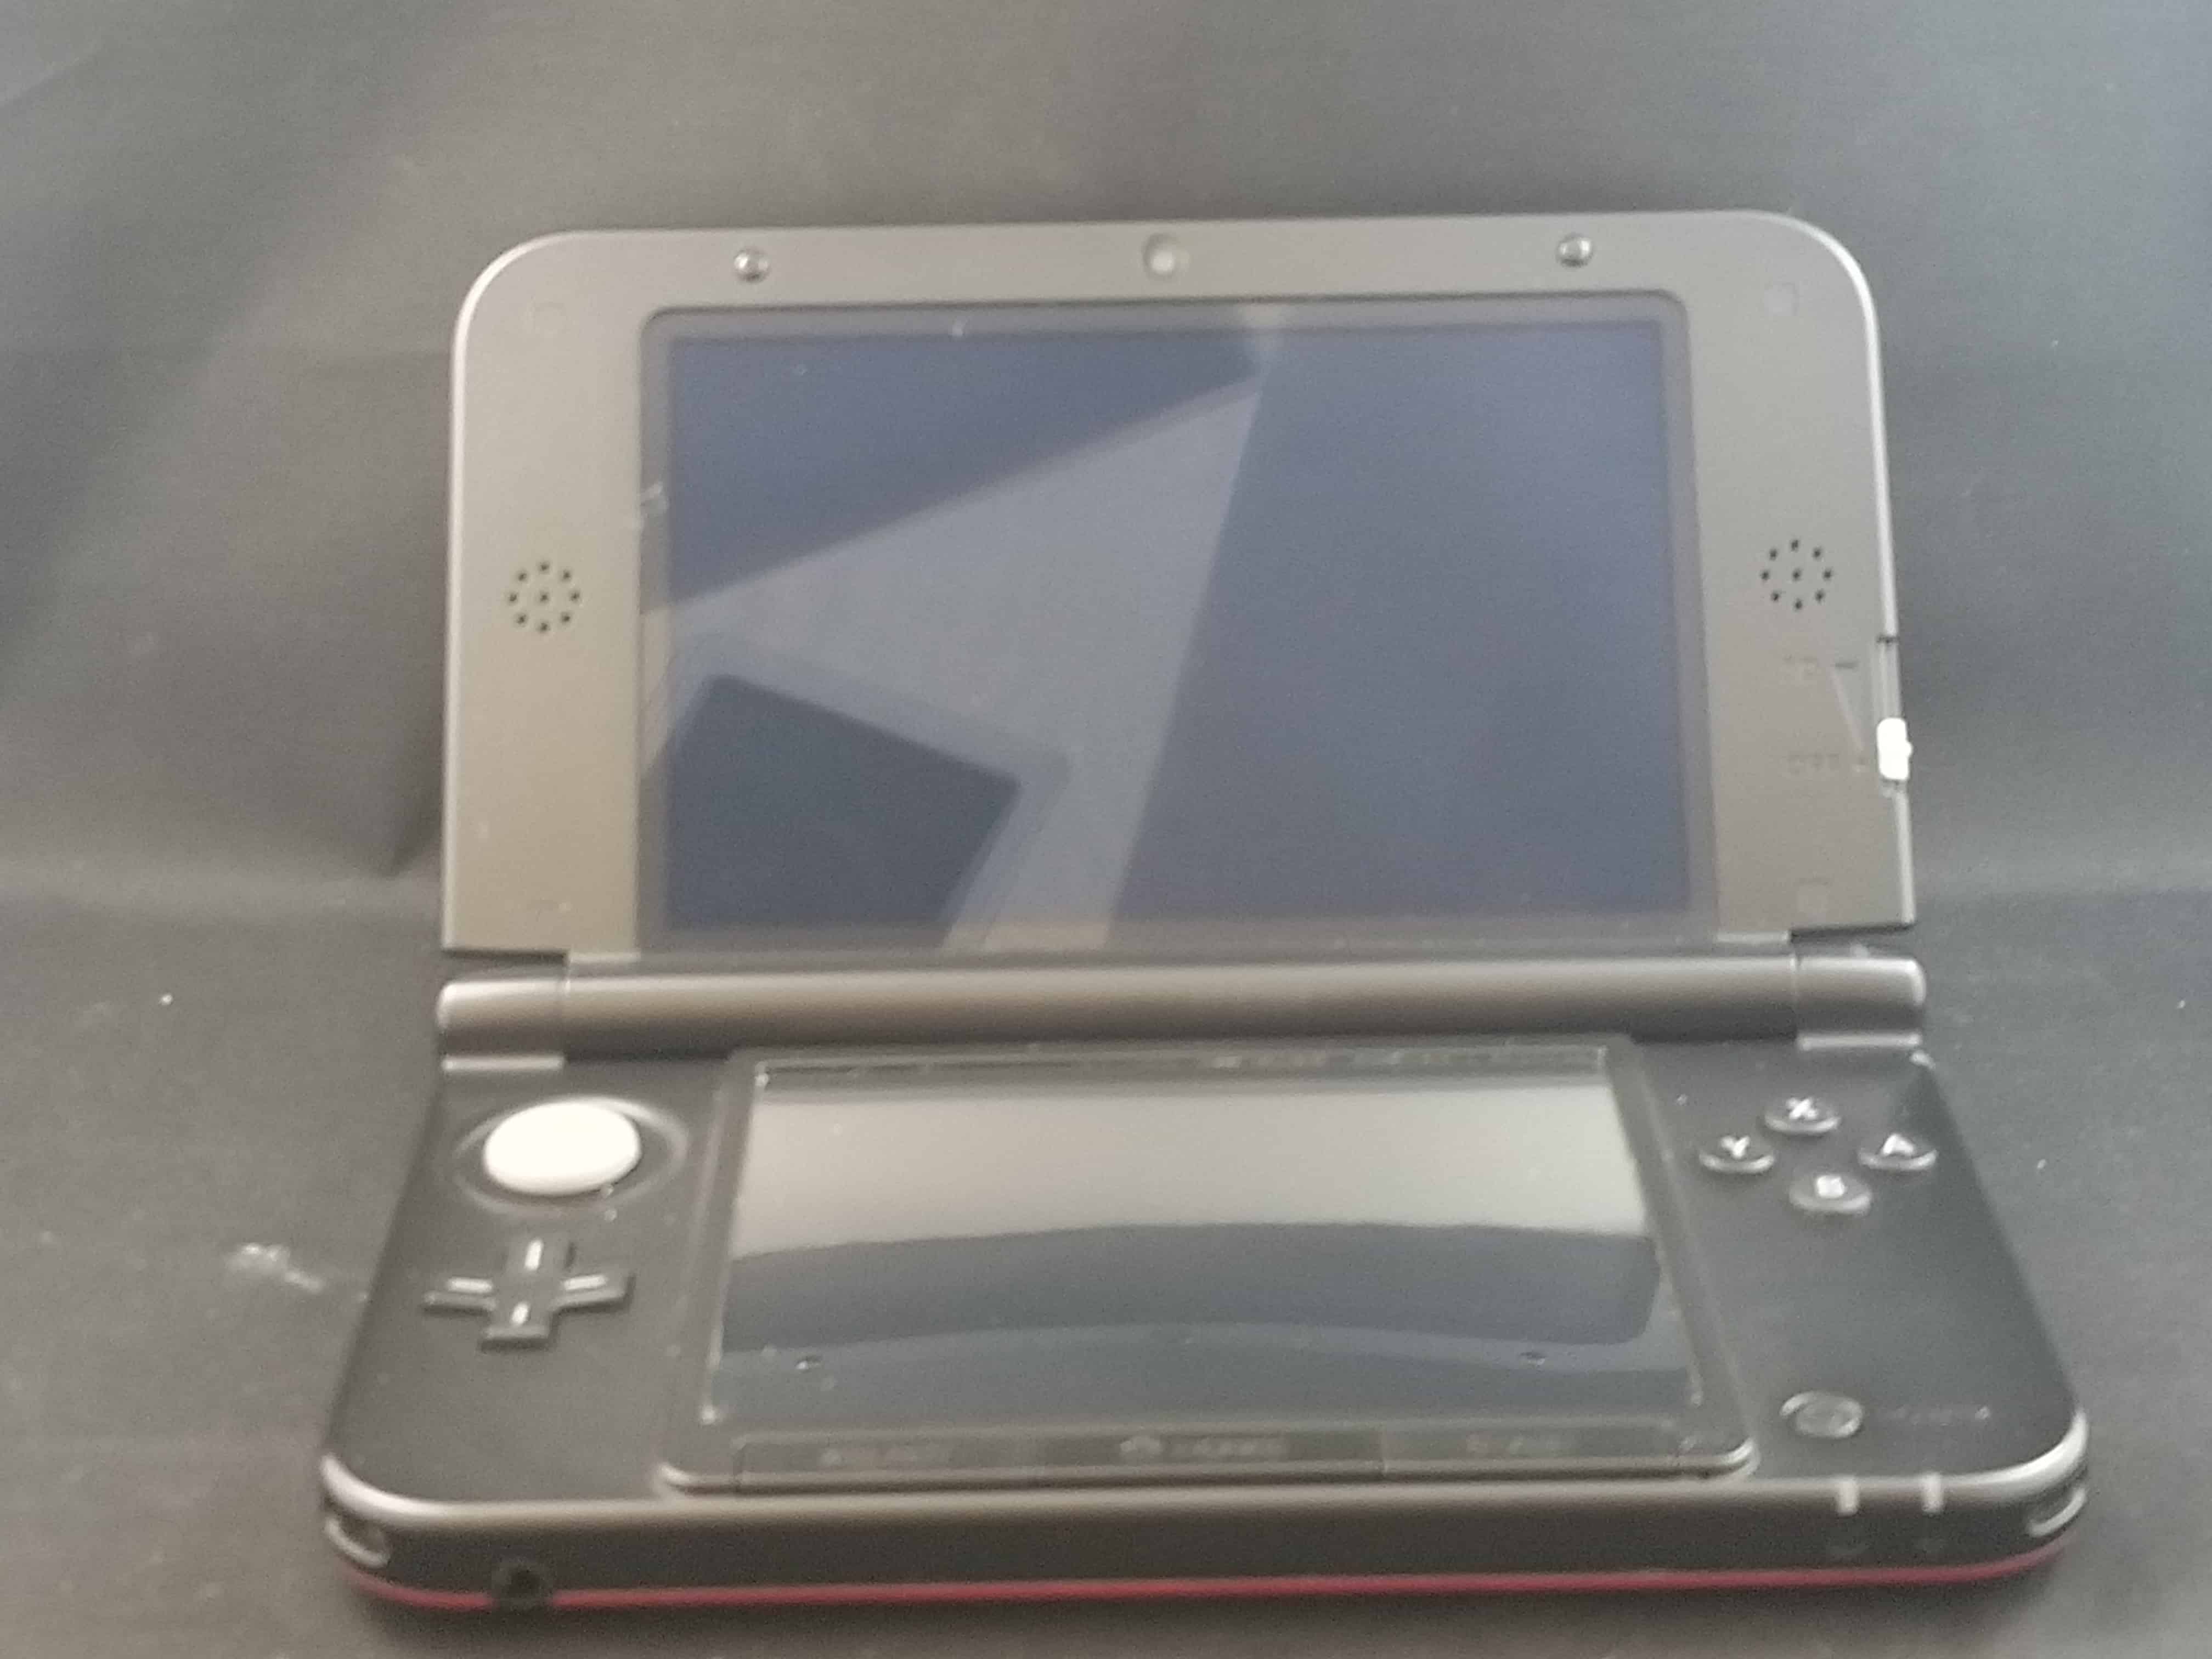 Addiction Limited Udvidelse Nintendo 3DS XL Pokemon X & Y Red Limited Edition System